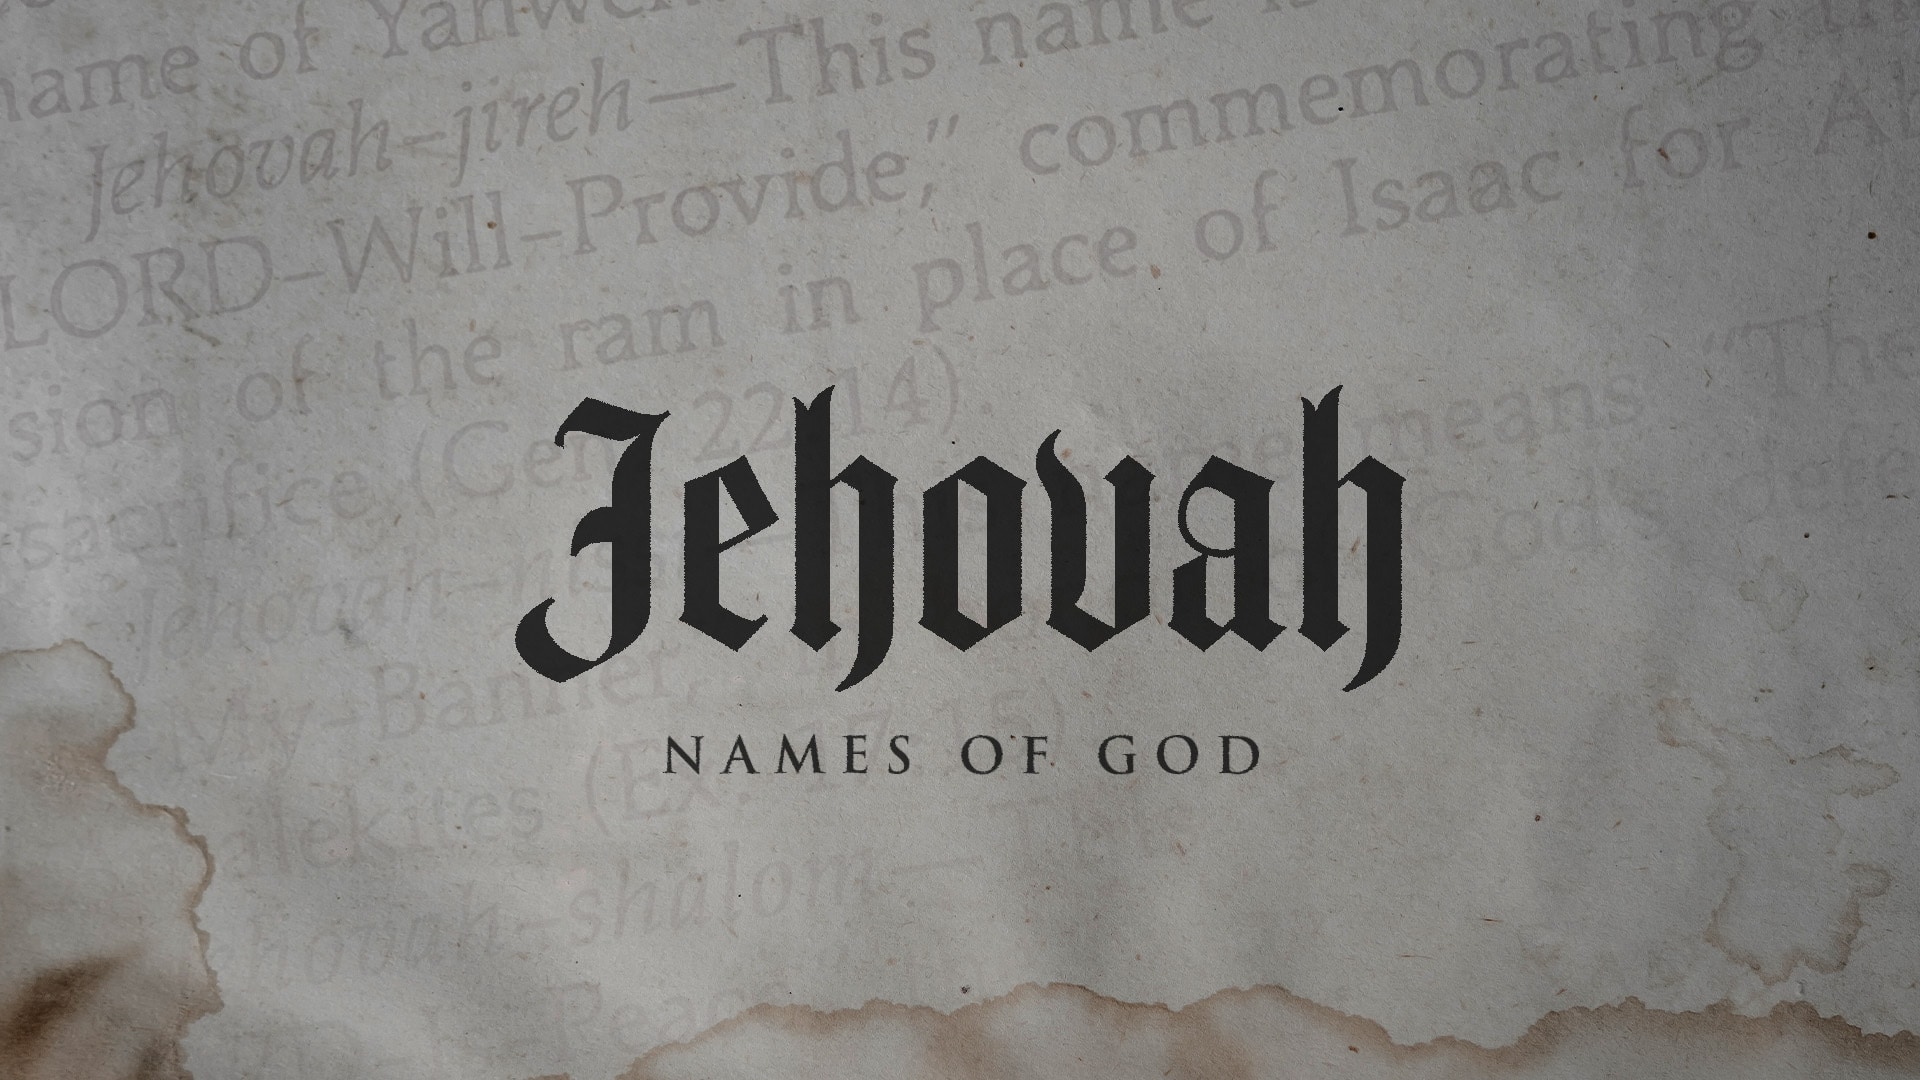 Jehovah - names of God, does the King James Bible say Jehovah?